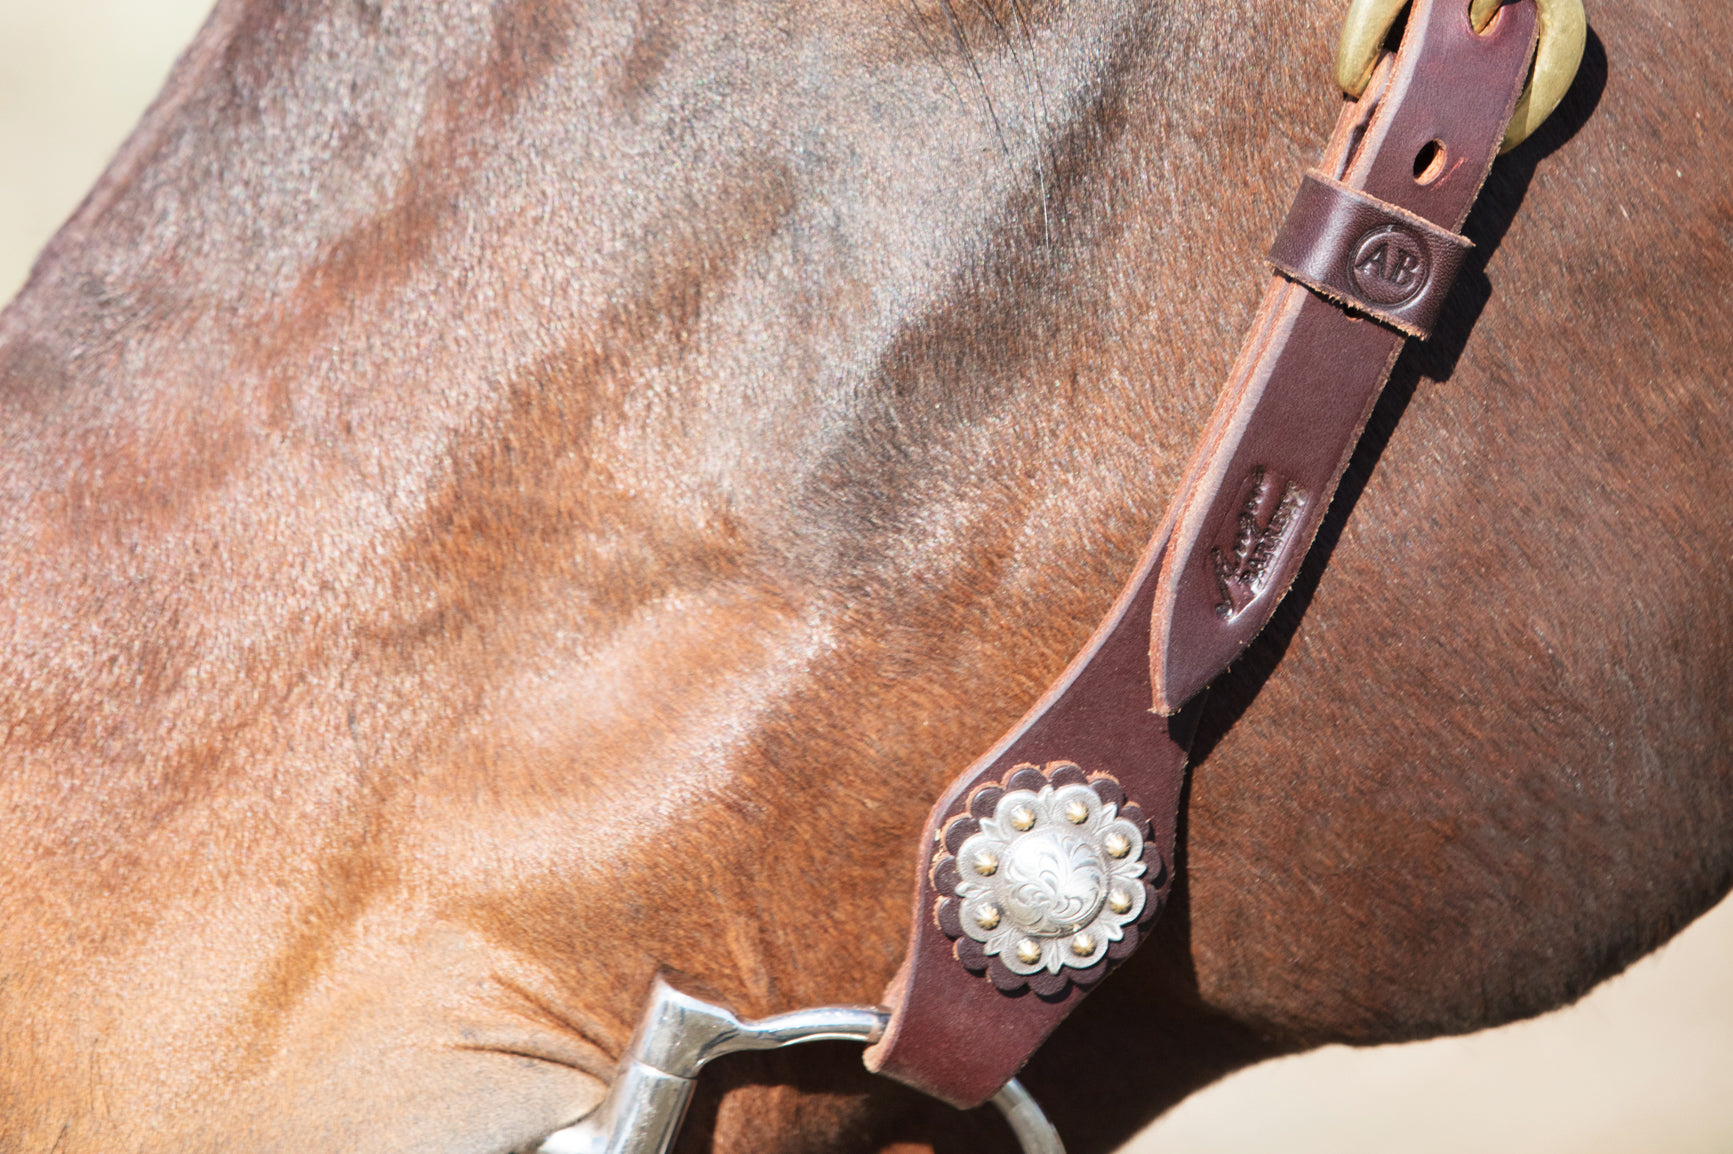 Angus Barrett's Sure Fit Shaped Brow Bridle has stunning berry conchos